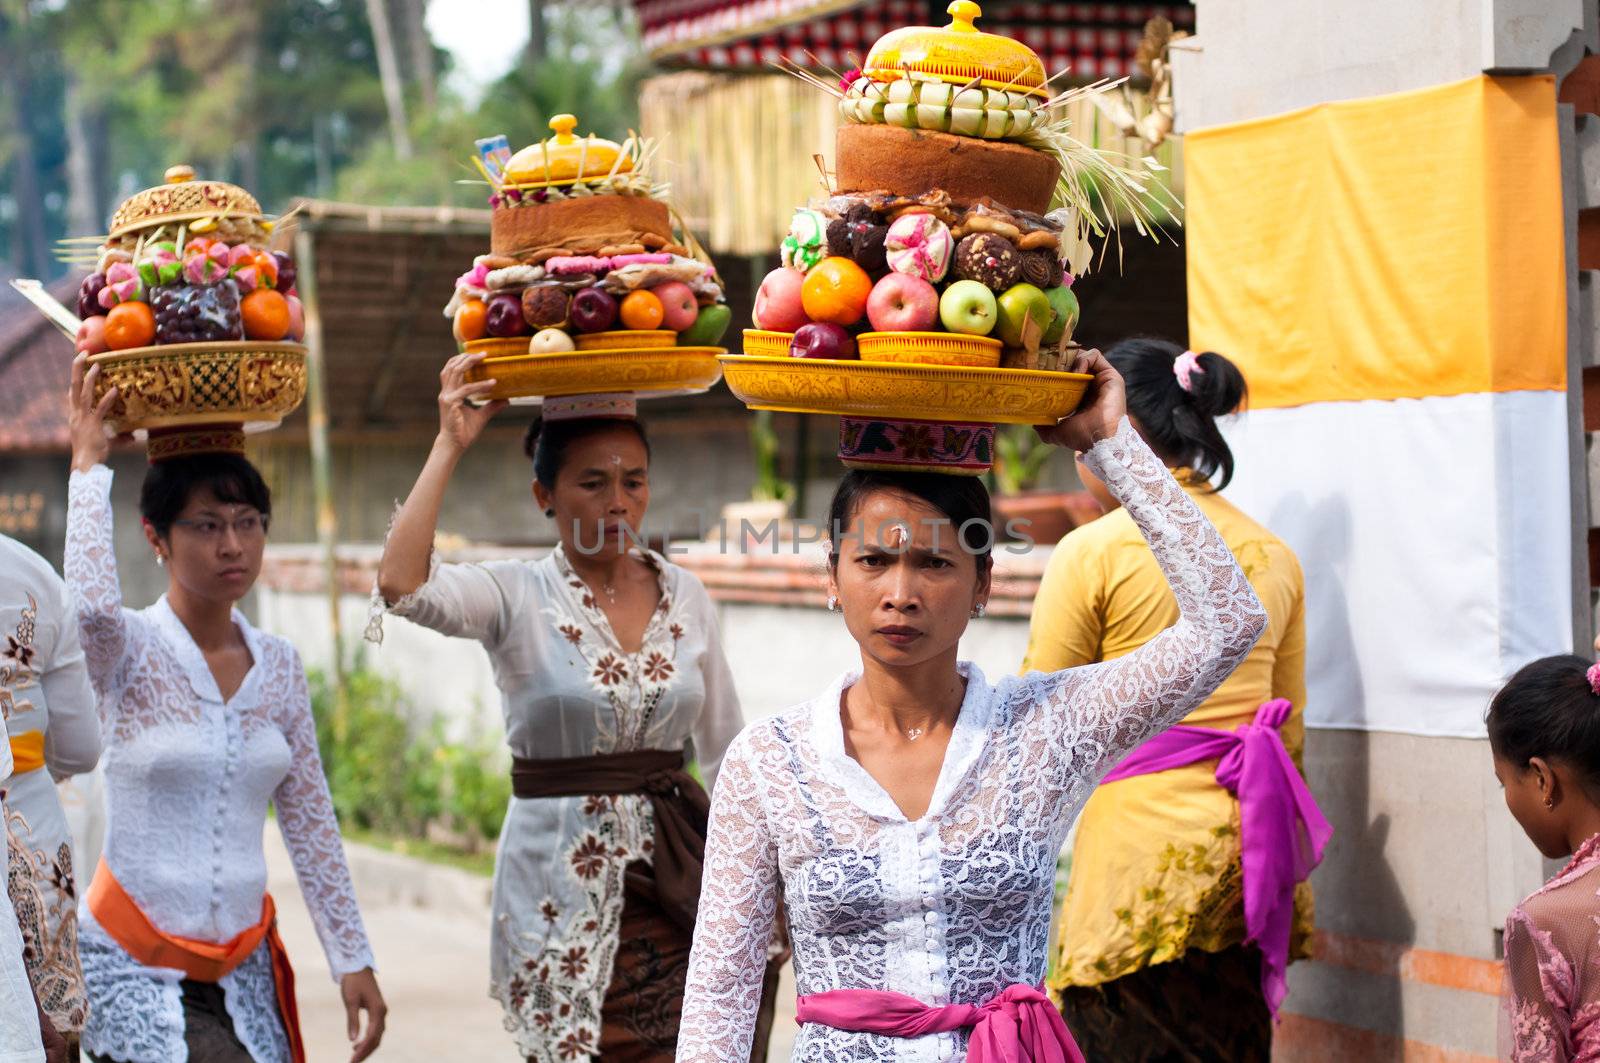 Tirta Empul, Bali, Indonesia - October 11, 2011: woman with basket on here head walking to Tirta Empul Temple to give offerings to the spirits